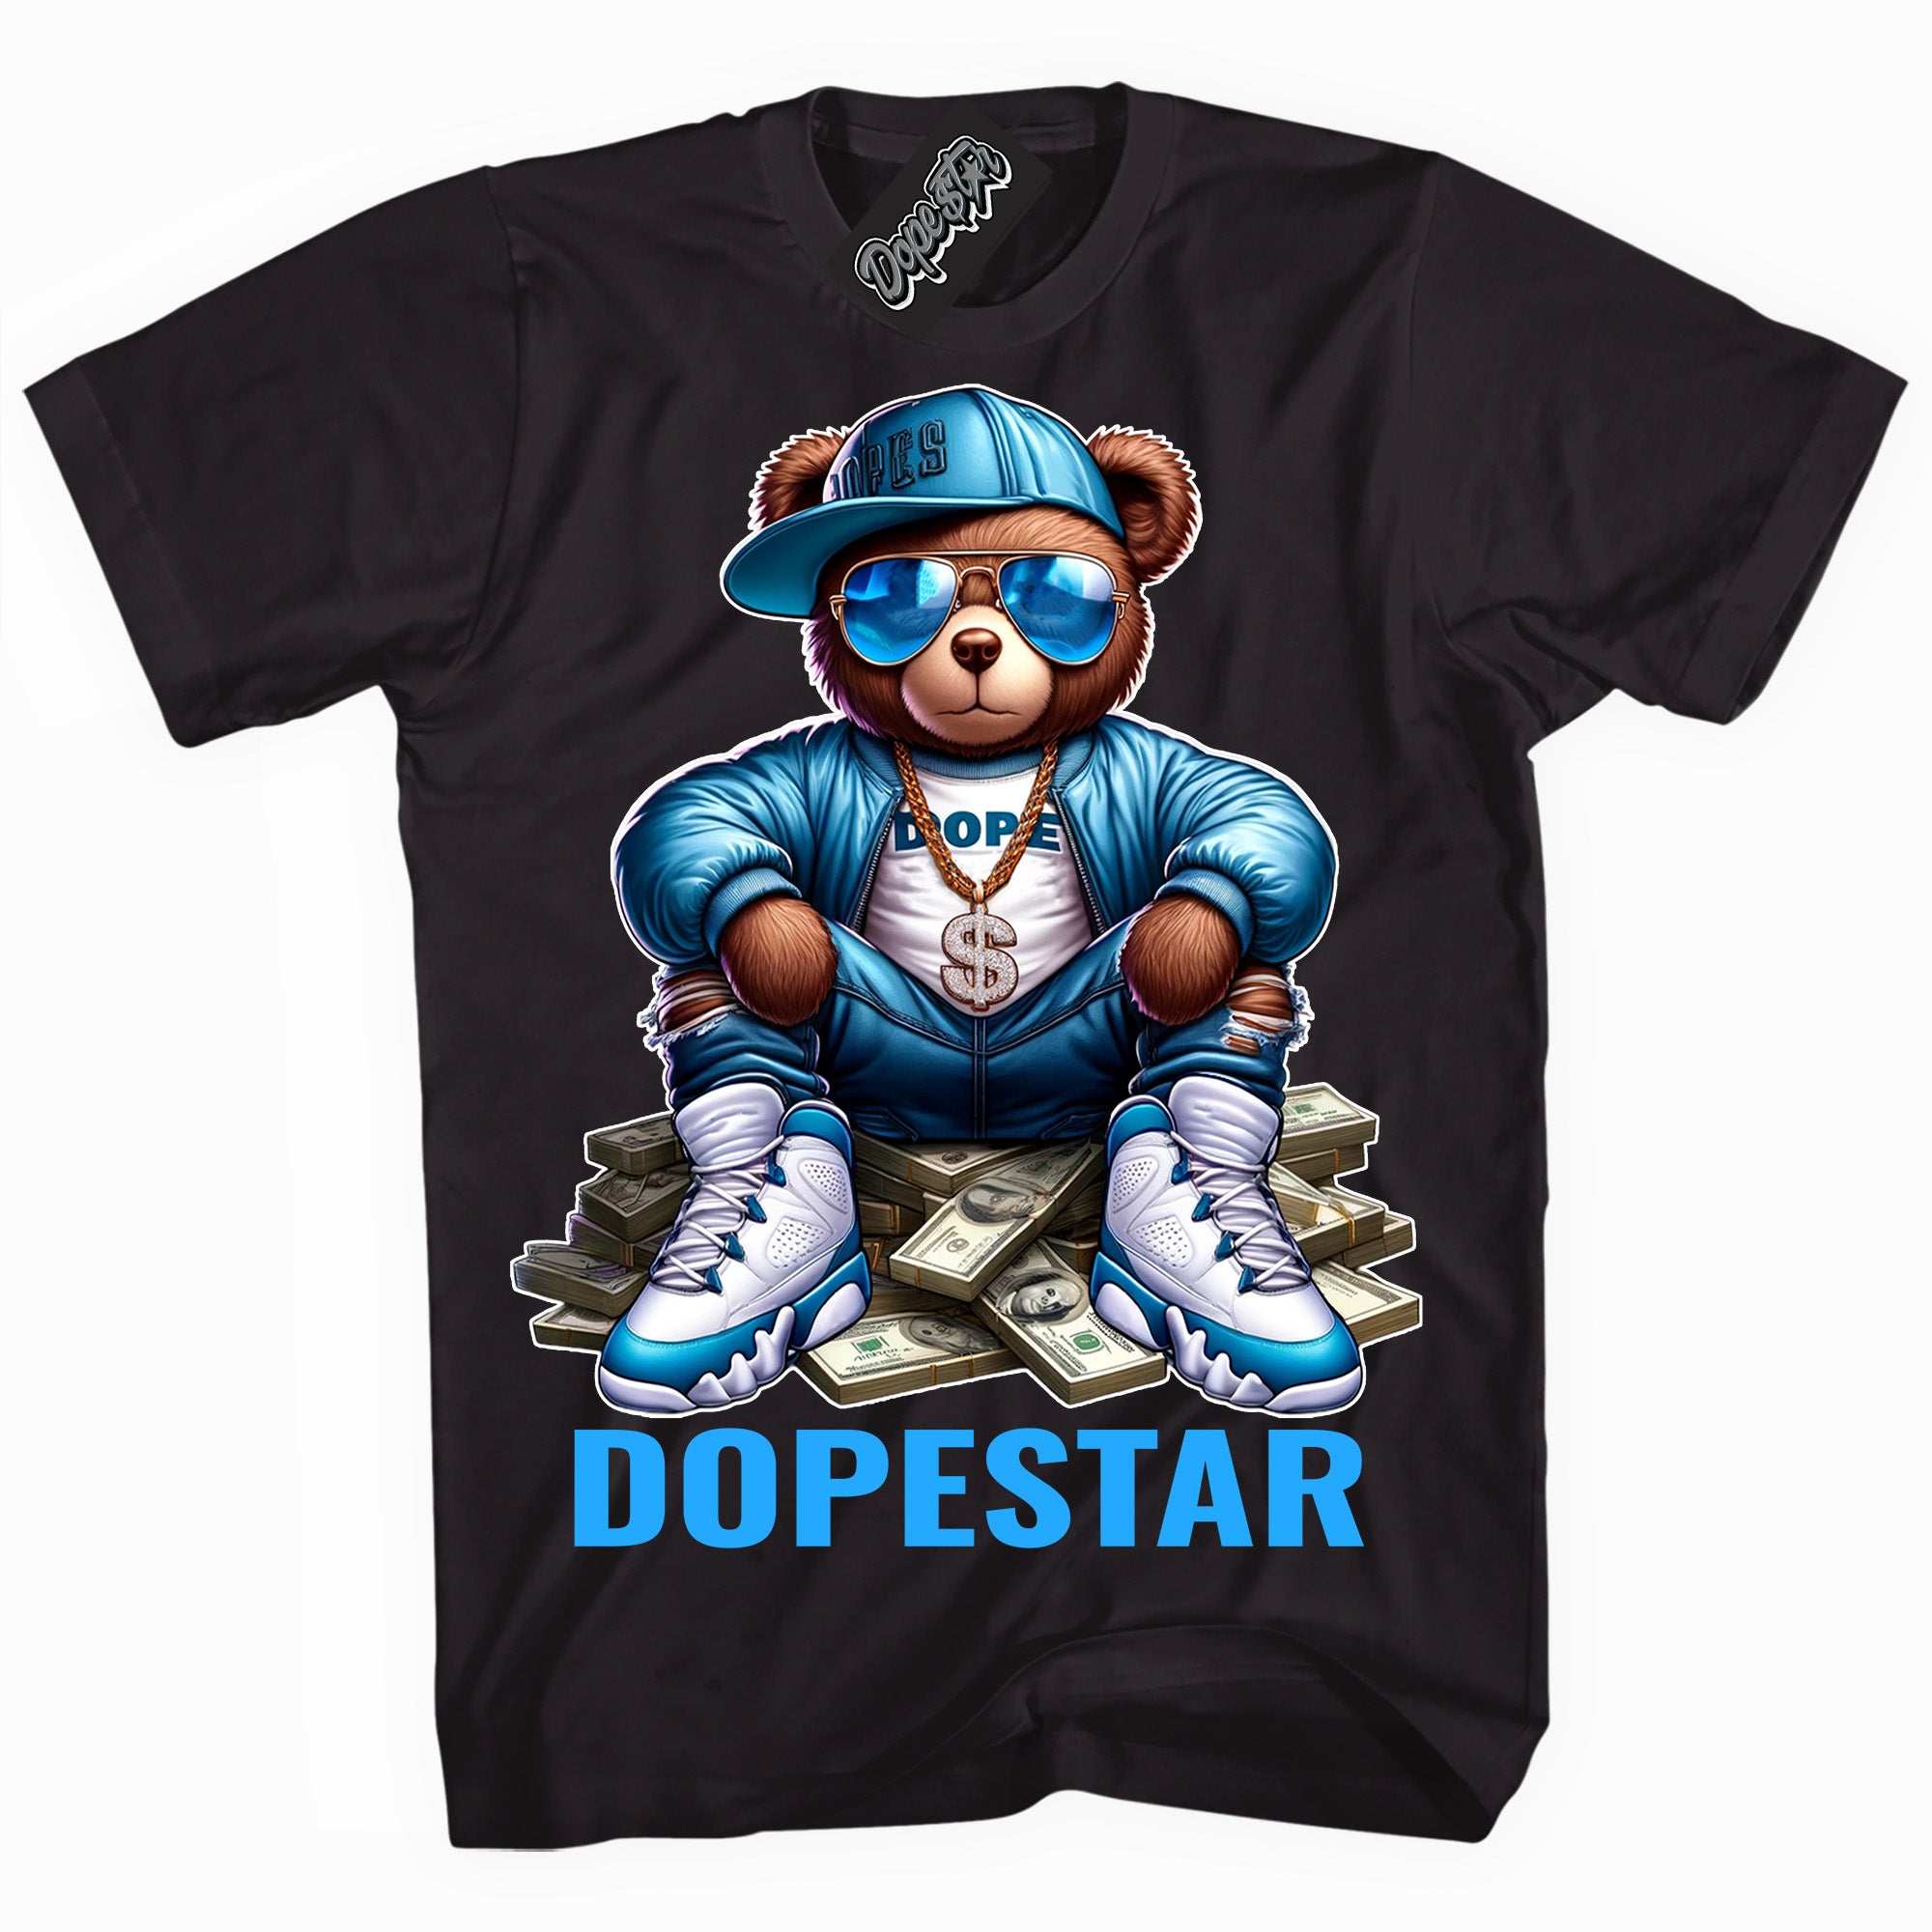 Cool Black graphic tee with “ Dope Bear ” design, that perfectly matches Powder Blue 9s sneakers 